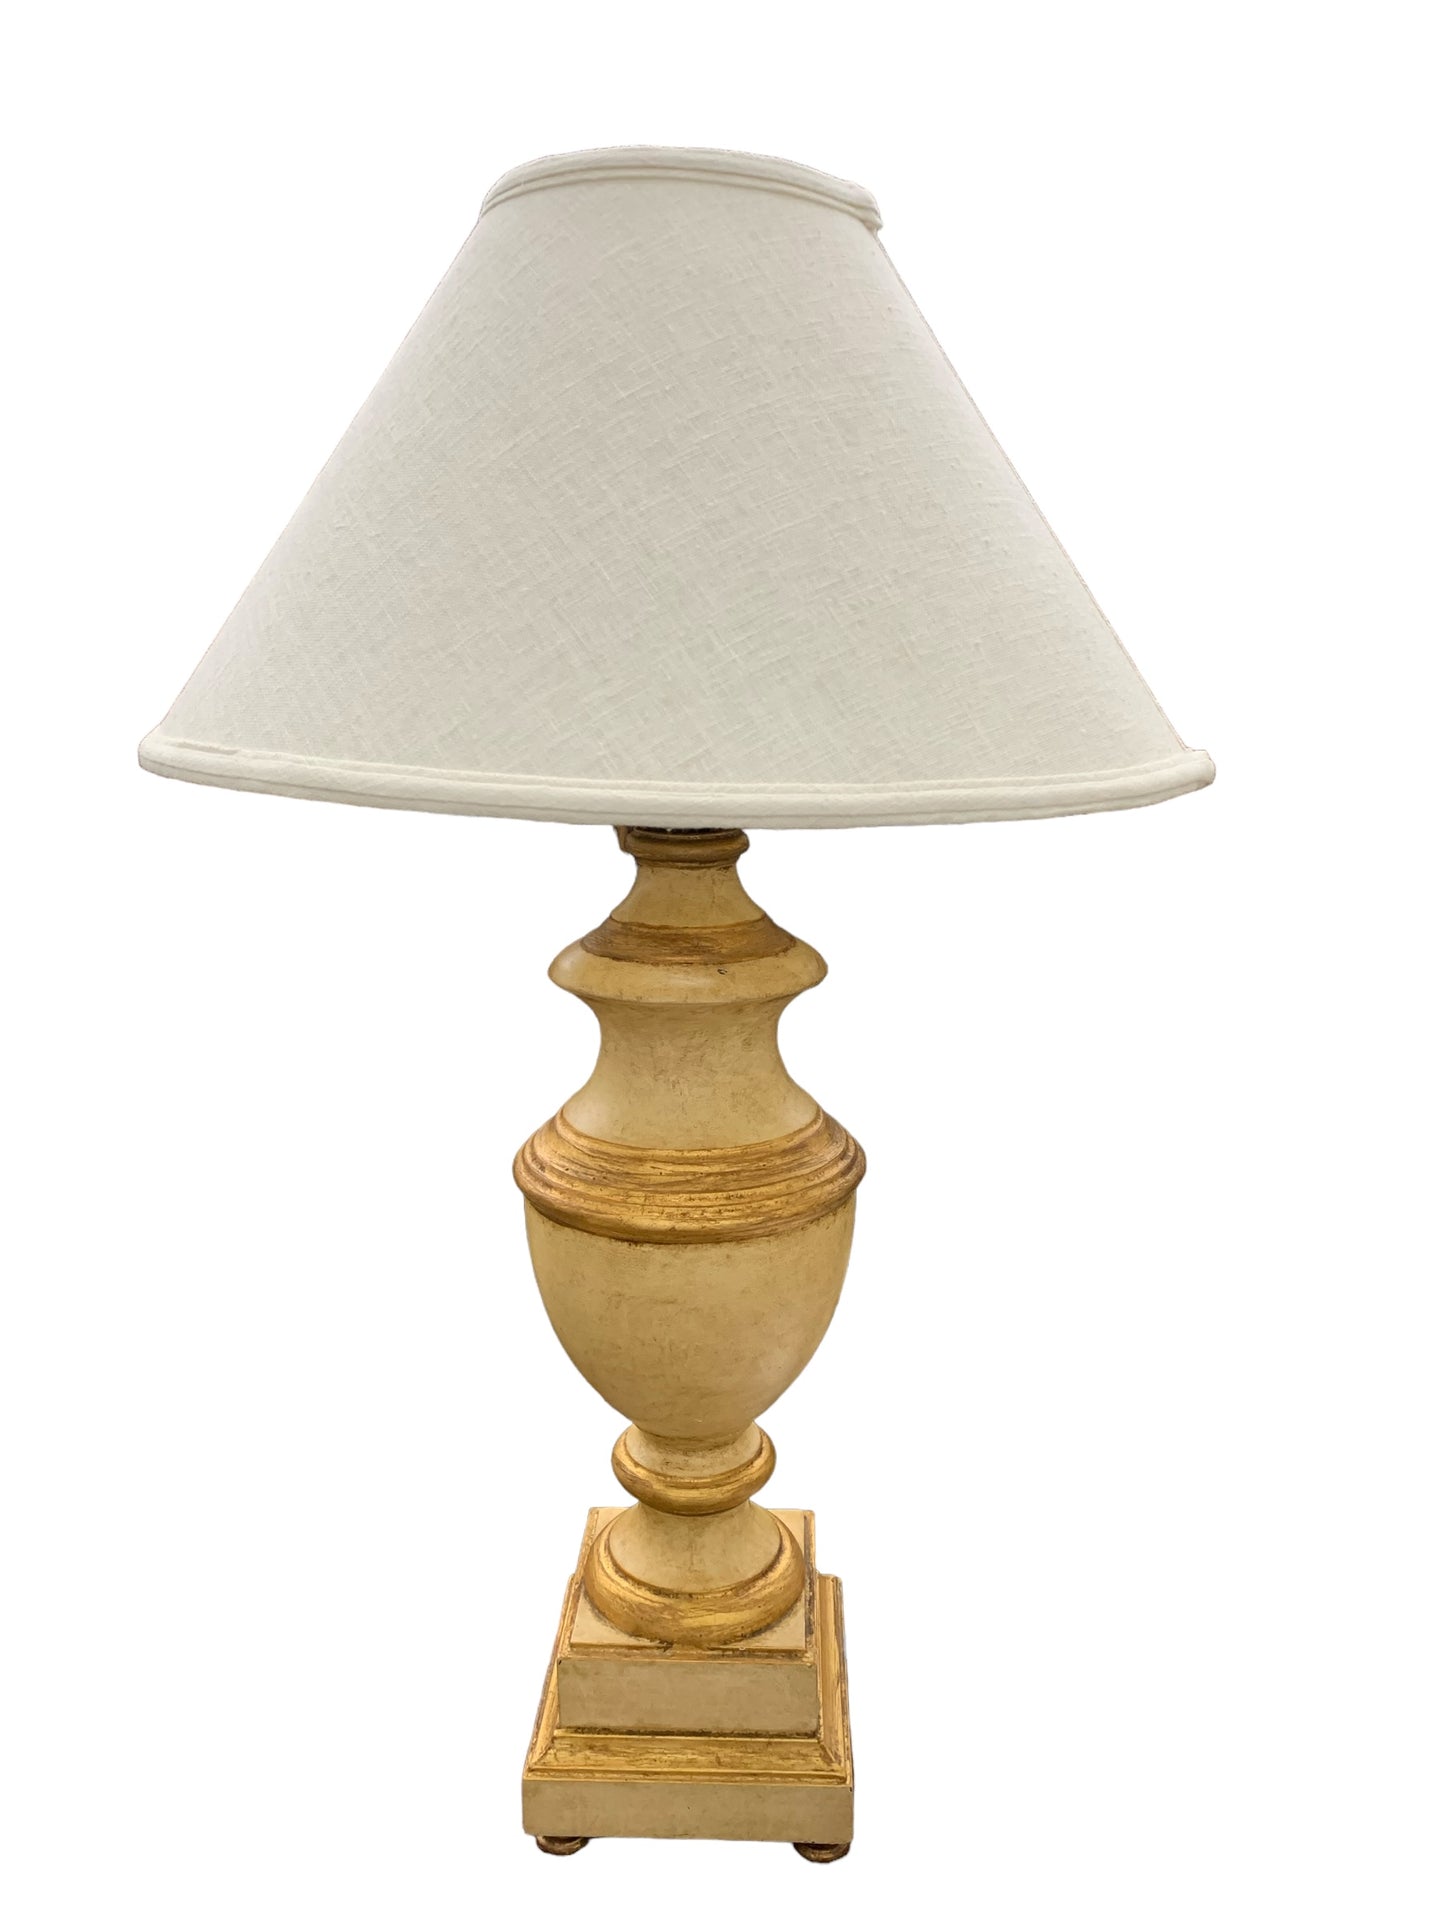 PAIR of beige urn-shape lamps w/ gold accents & ivory shade, 31.5" h